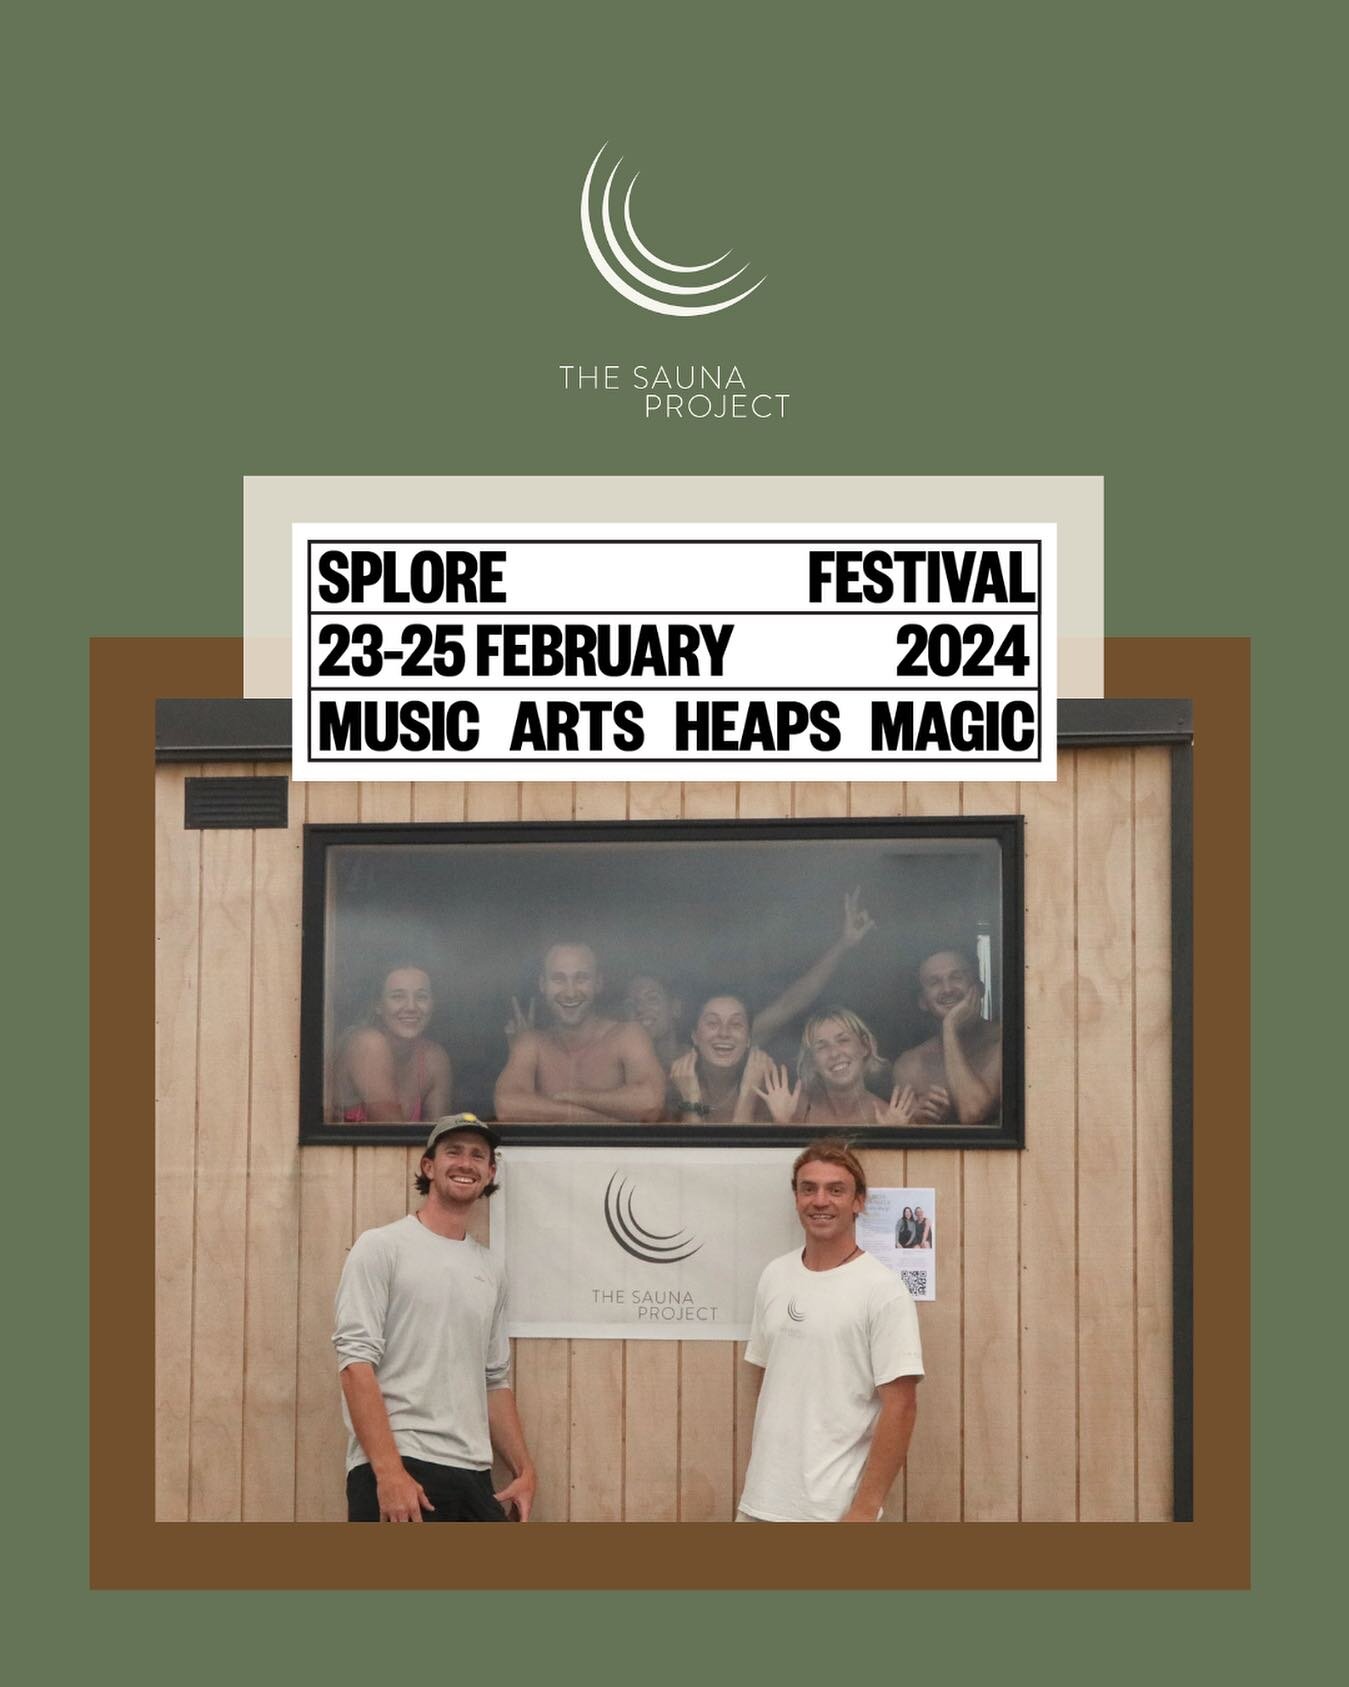 This one is close to home. @splorefestival means a lot to us at The Sauna Project. Since our first visit five years ago, we have attended every single year. This will be the first year attending with the saunas 😆

Splore is a place to have fun with 